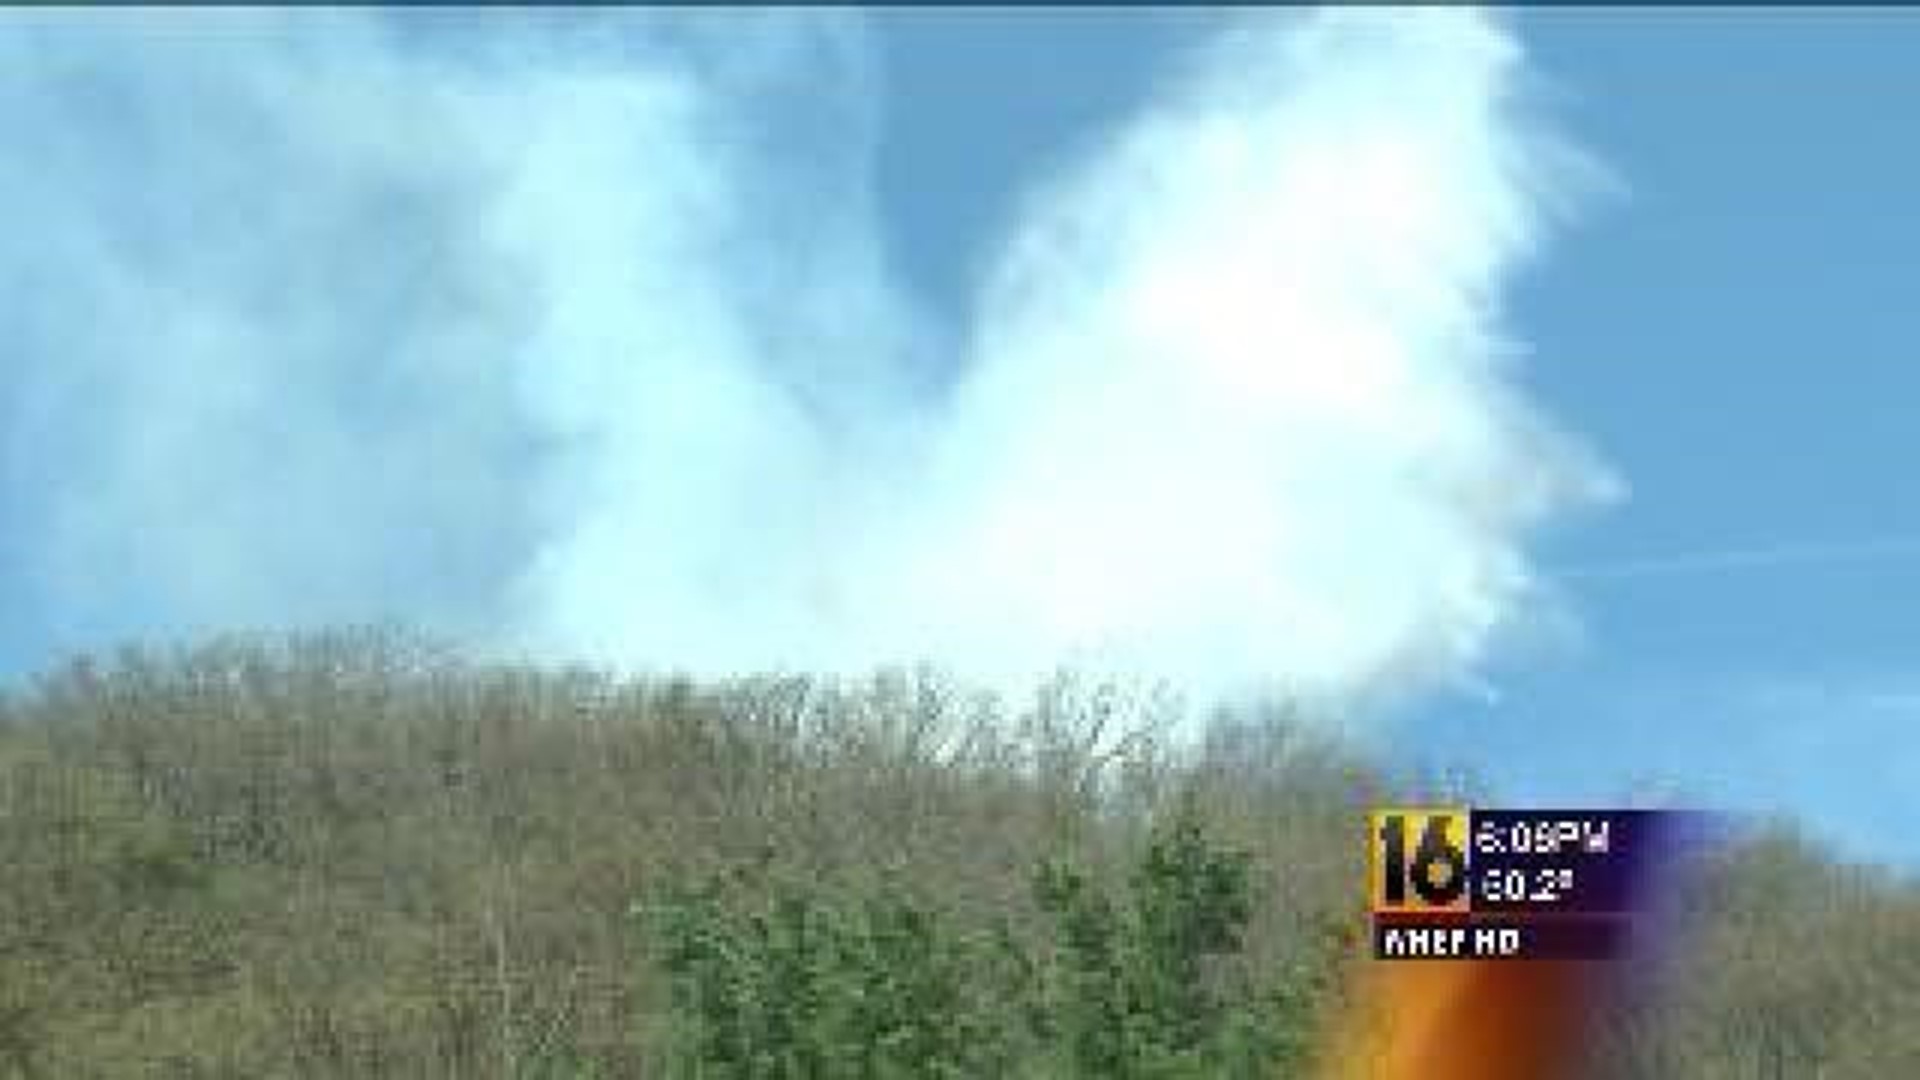 Crews Battle Brush Fire from Ground and Air